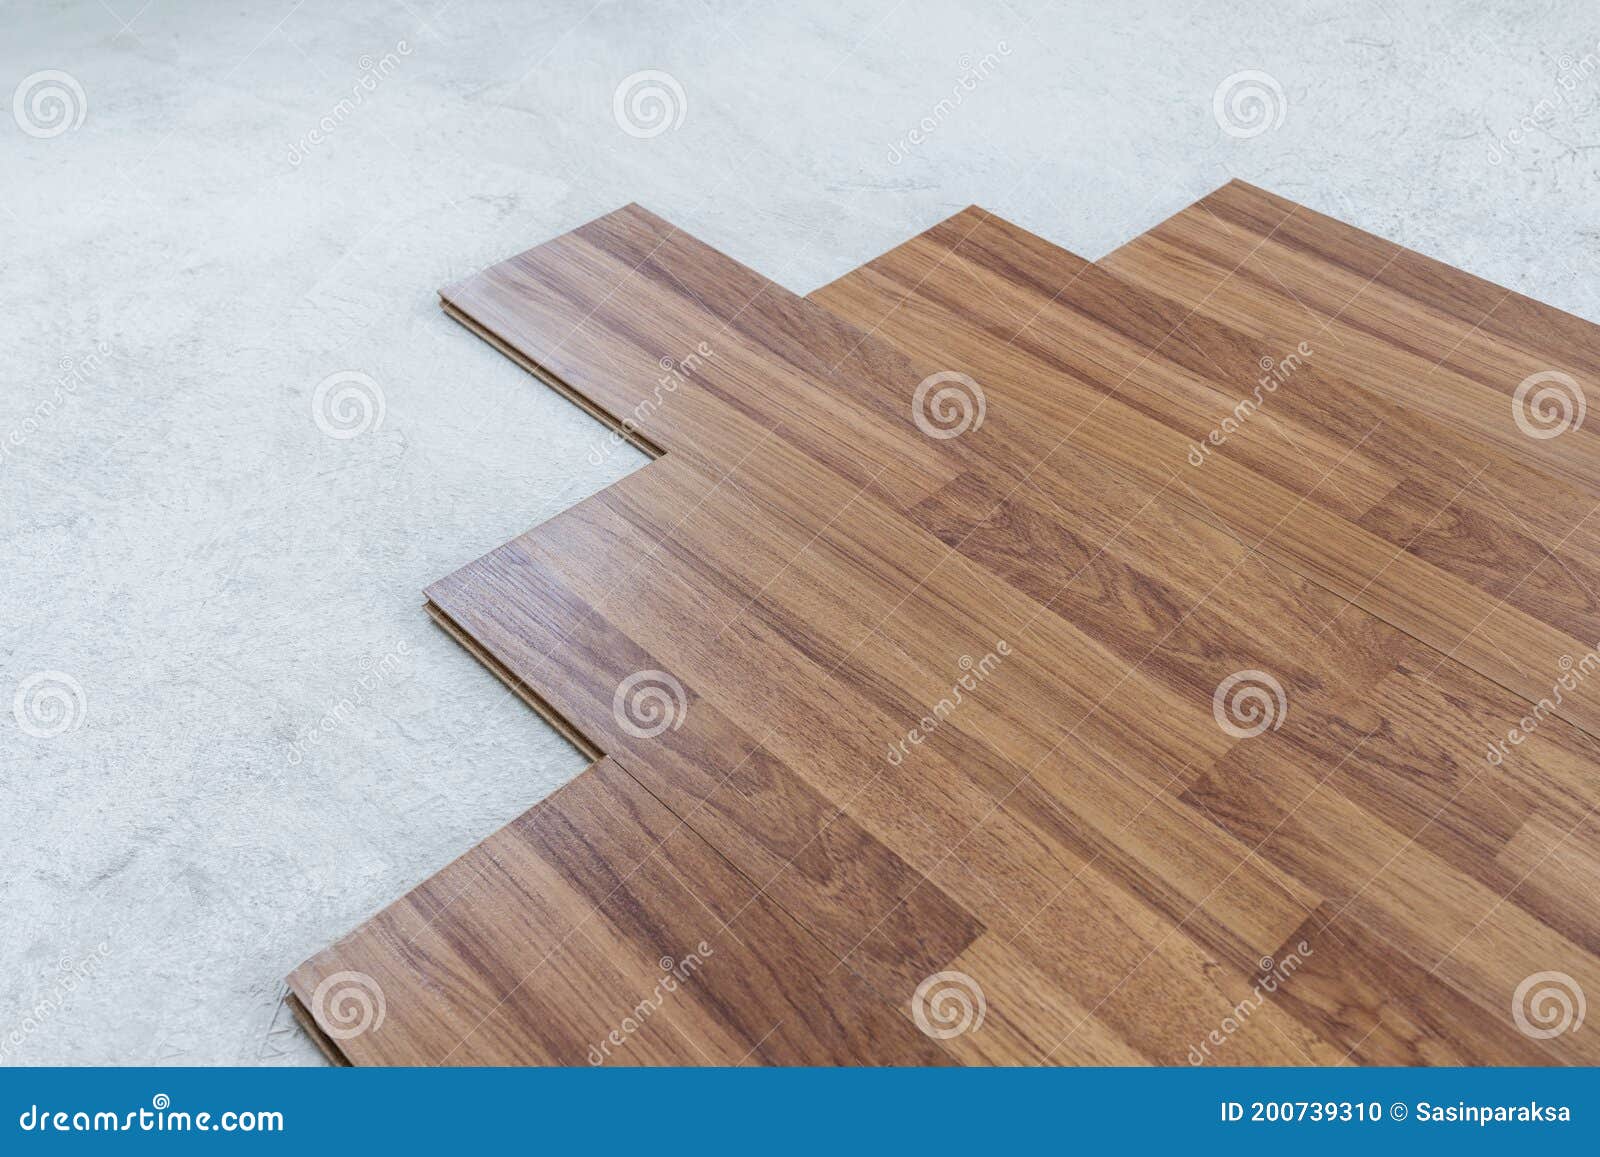 laminated wood flooring installation and renovation, with base cement floor